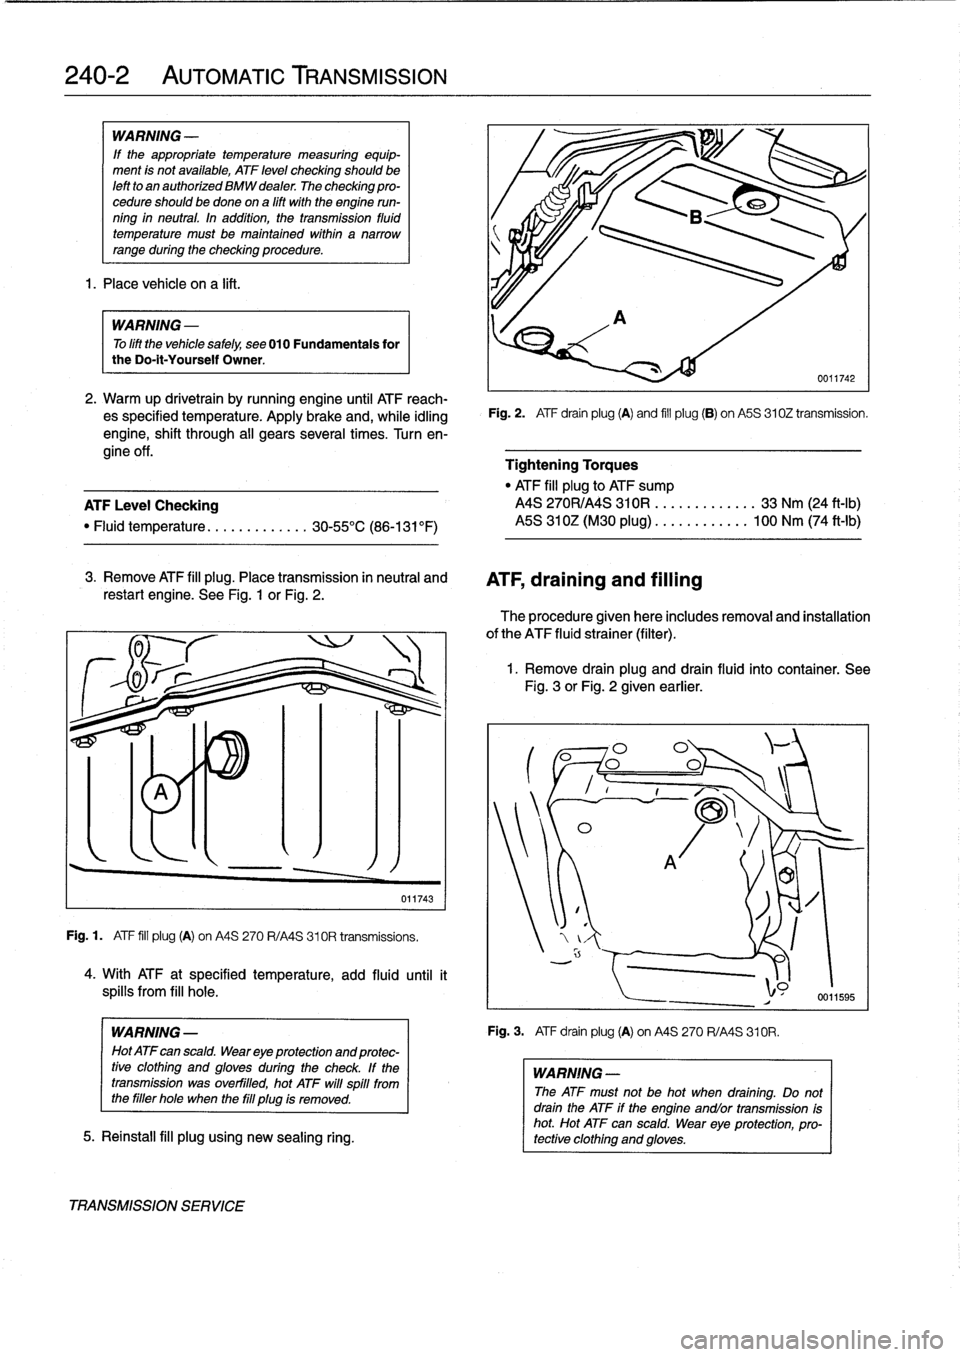 BMW 325i 1993 E36 Service Manual 
240-2

	

AUTOMATIC
TRANSMISSION

WARNING
-

If
the
appropriate
temperature
measuring
equip-
ment
is
not
available,
ATF
leve¡
checking
shouldbe
left
to
an
authorized
BMW
dealer
The
checking
pro-
ced